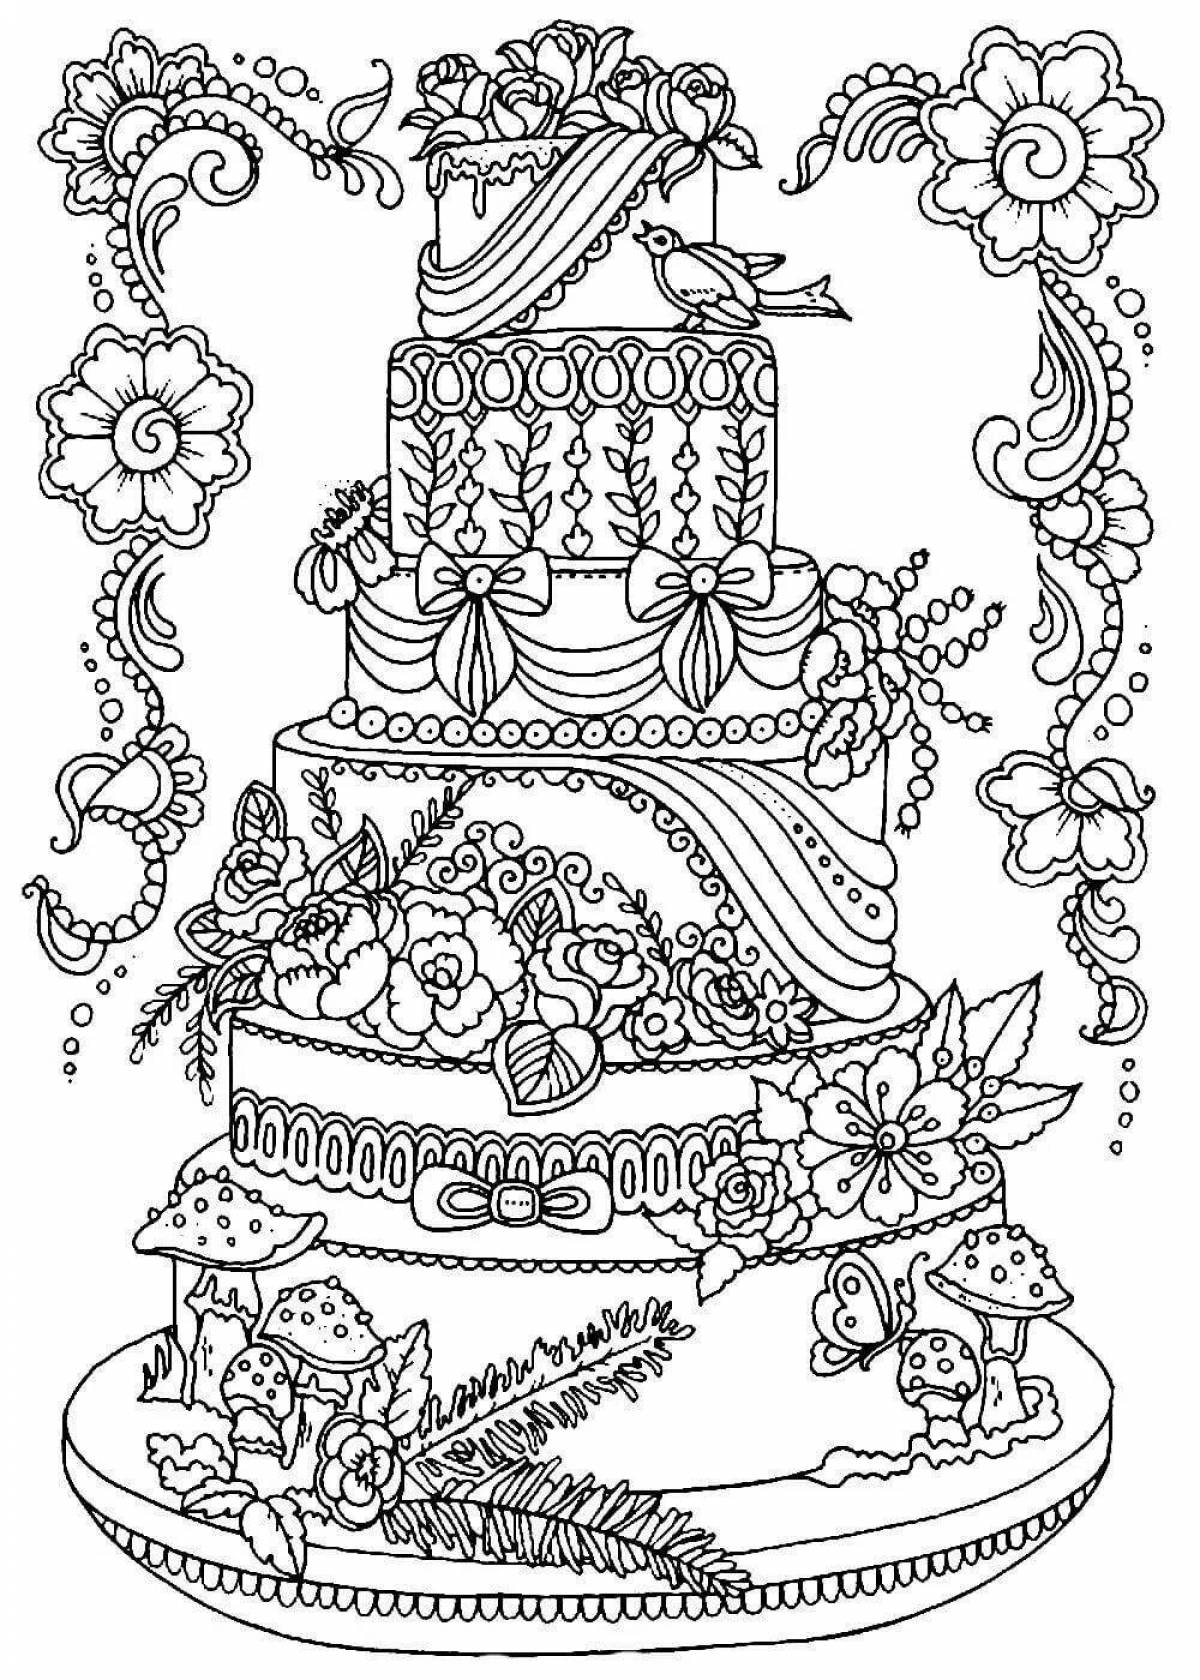 Classic beautiful cake coloring page